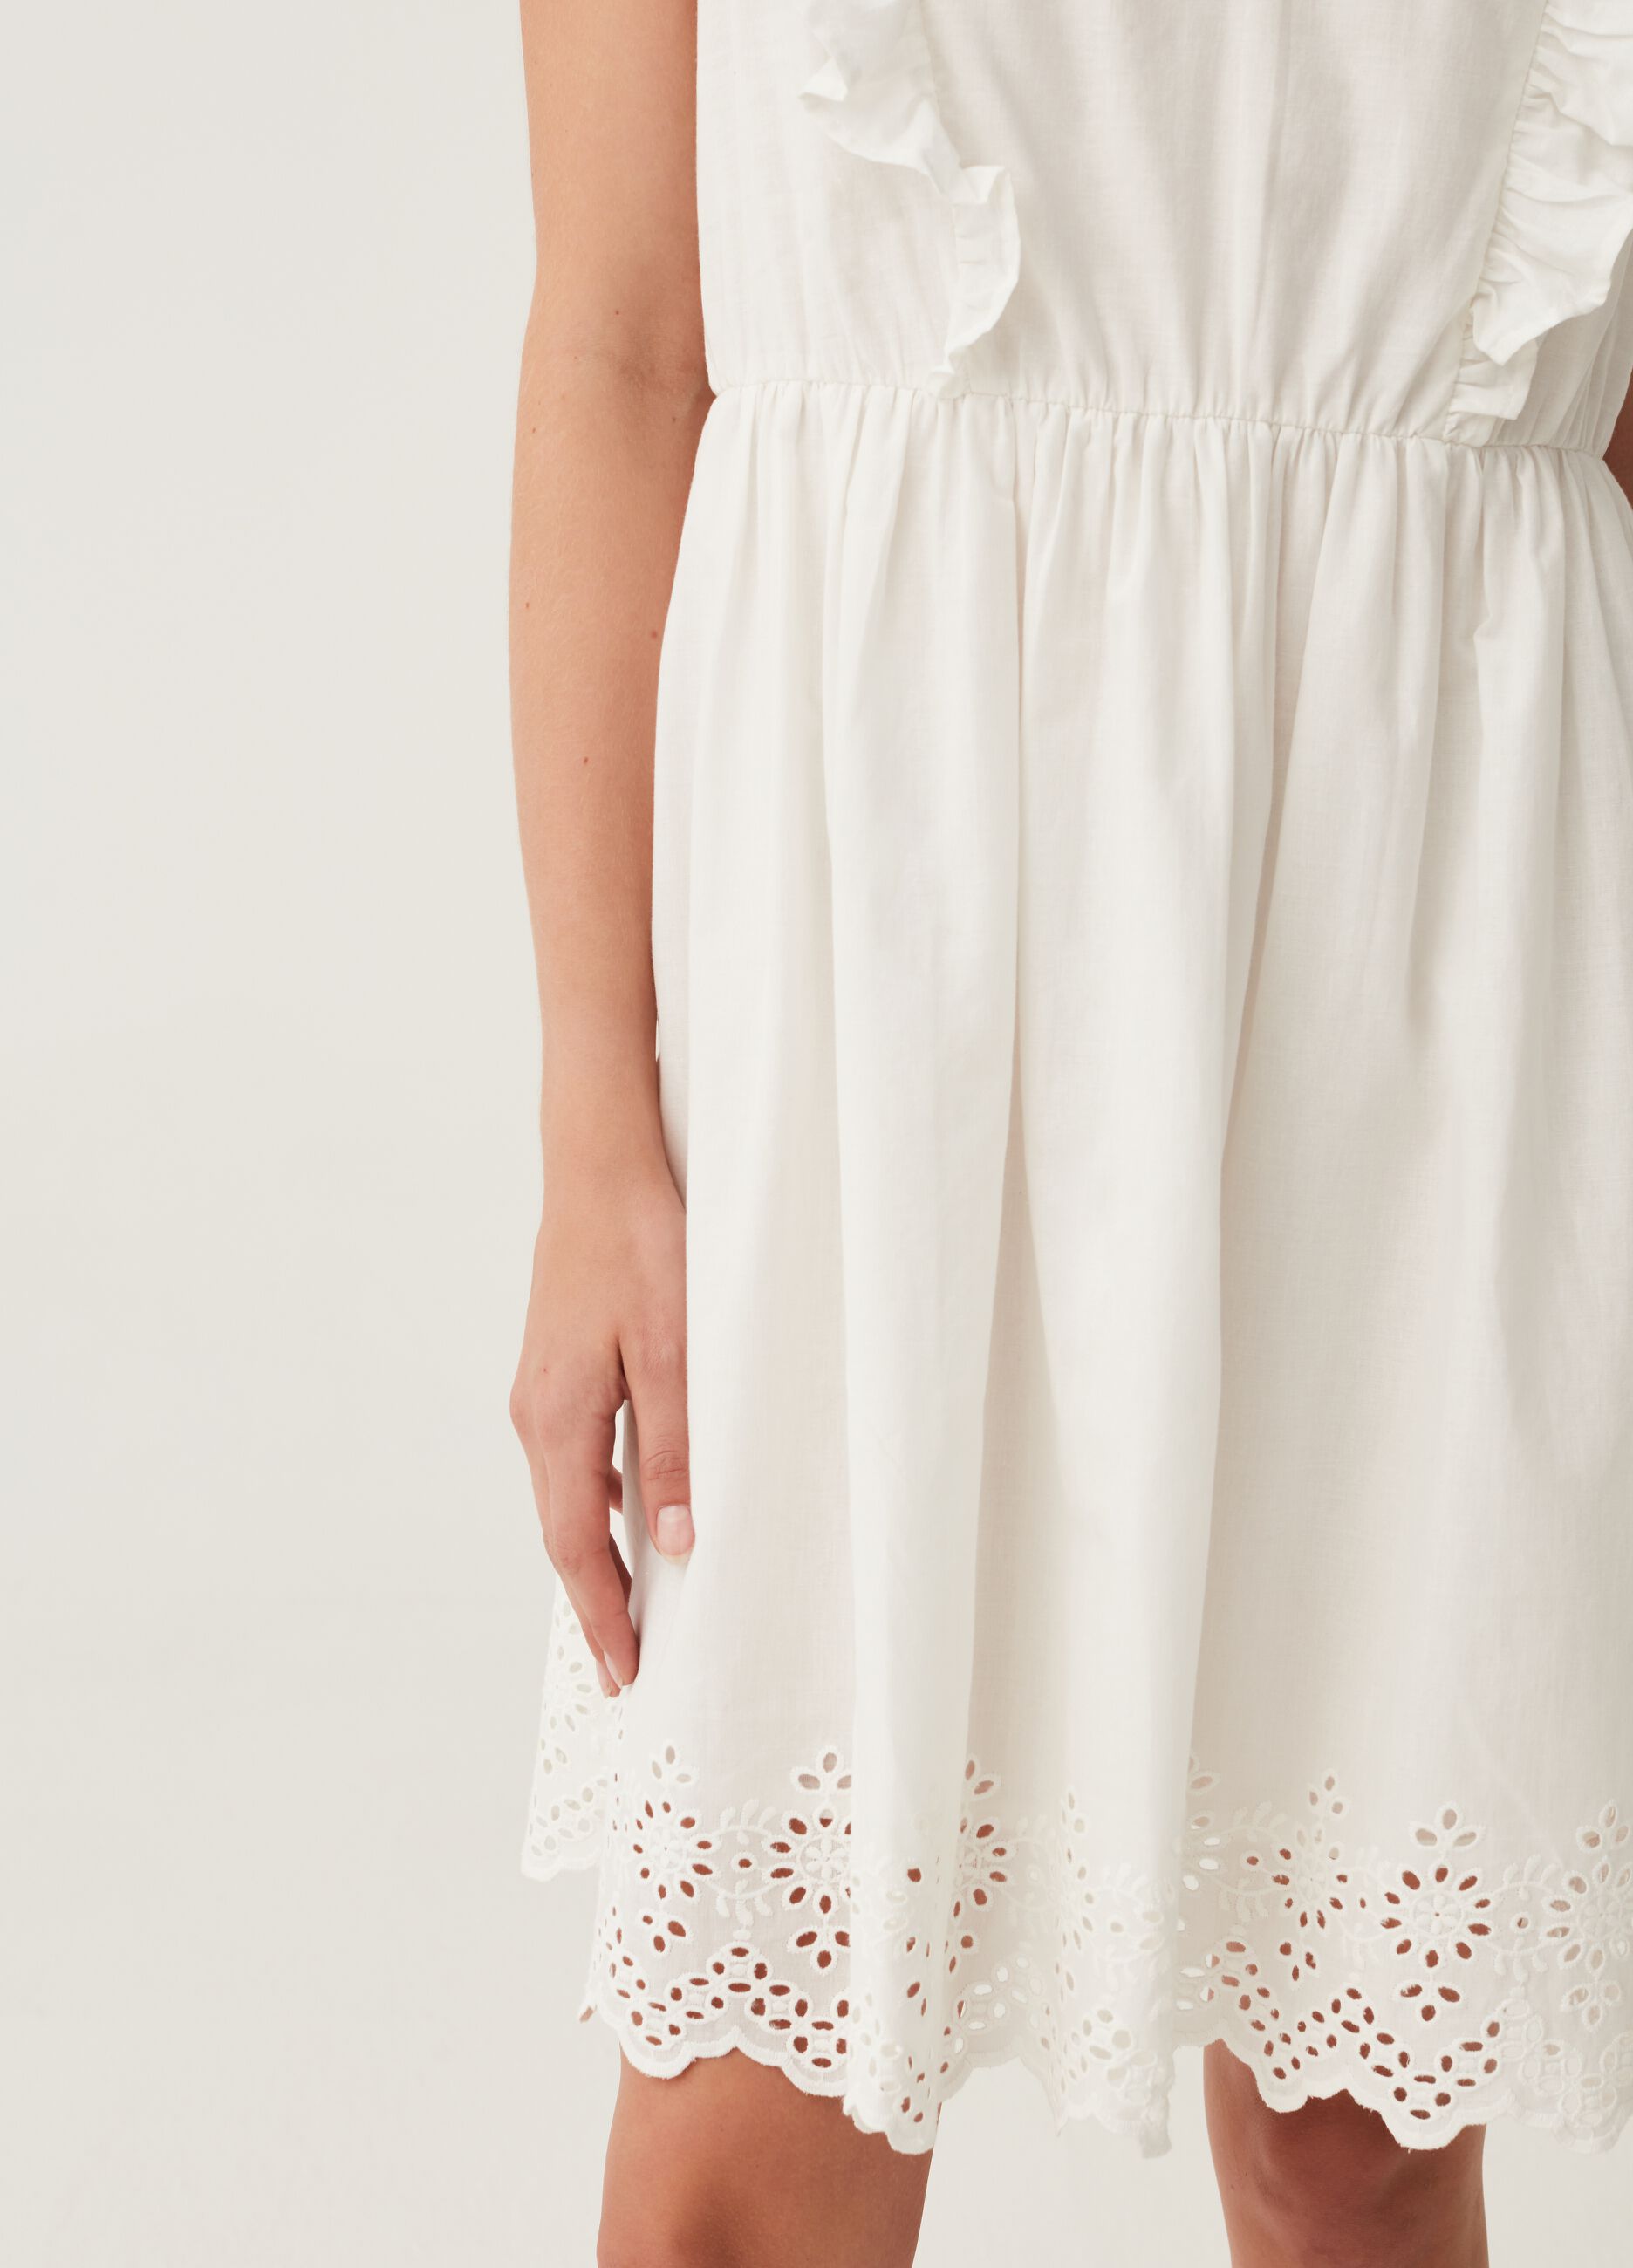 Short dress with broderie anglaise edging